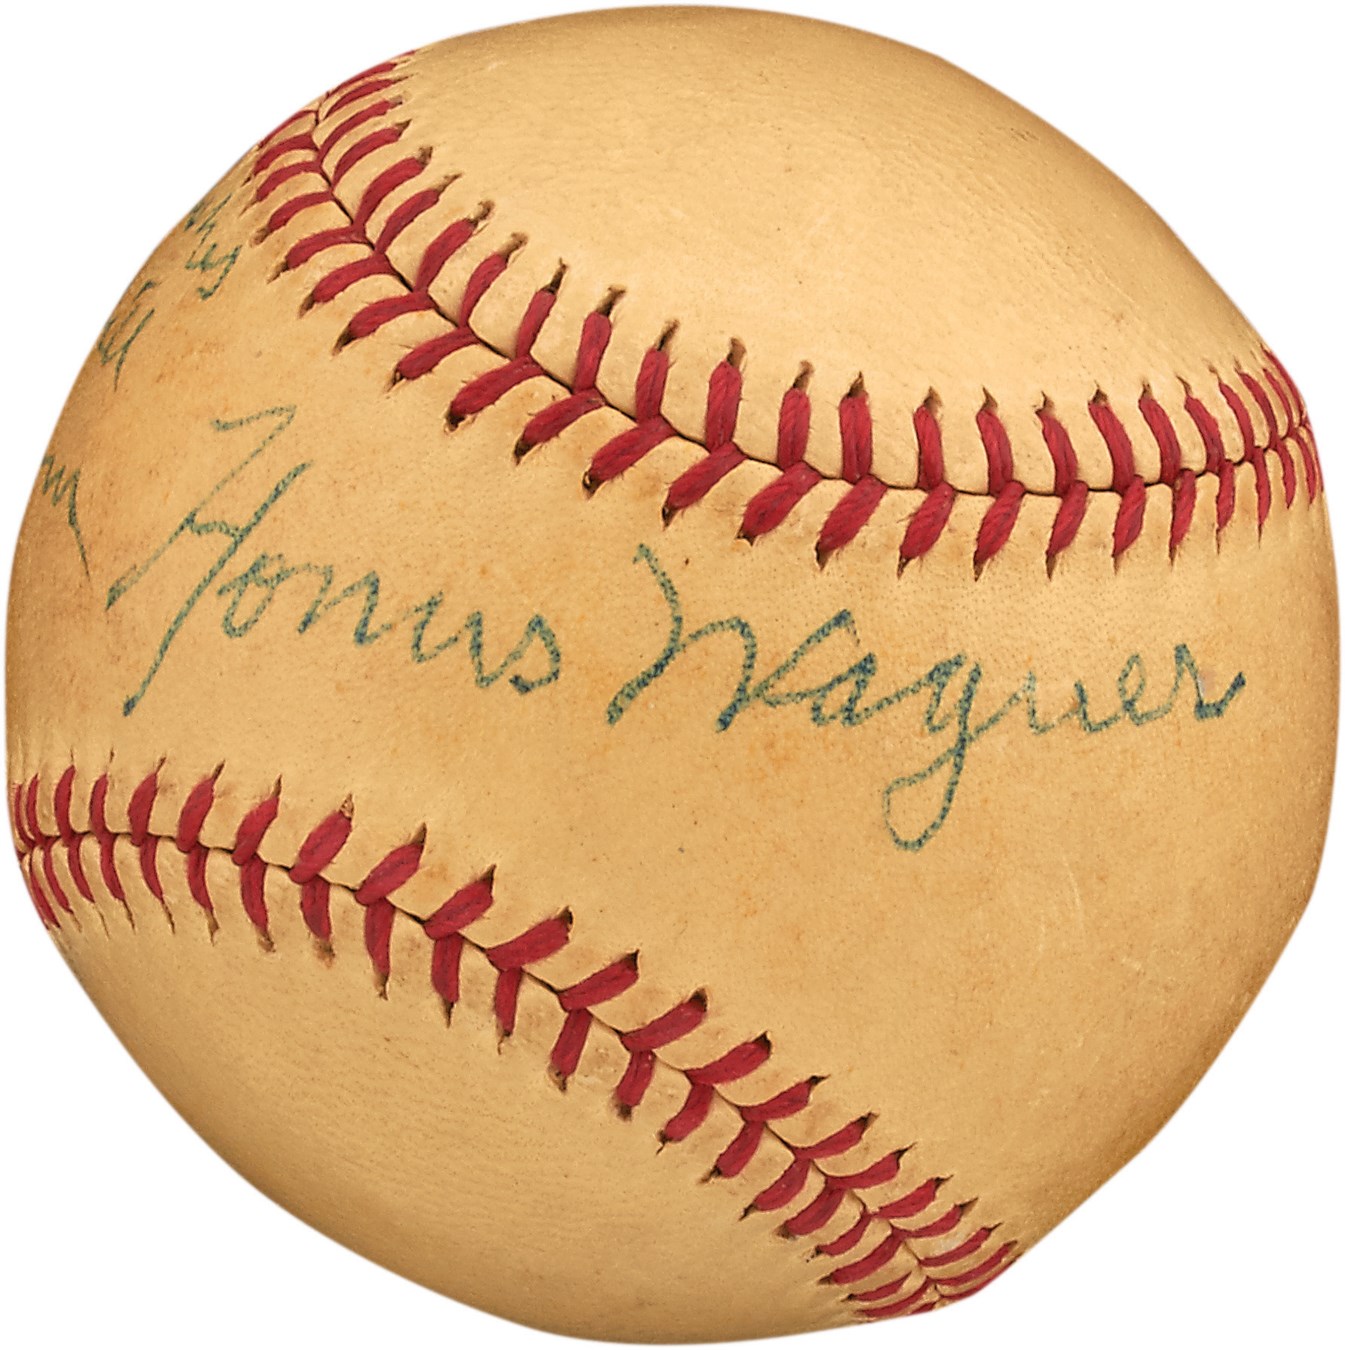 Exceptional Honus Wagner Single-Signed Baseball with PSA/DNA Graded "7" Signature